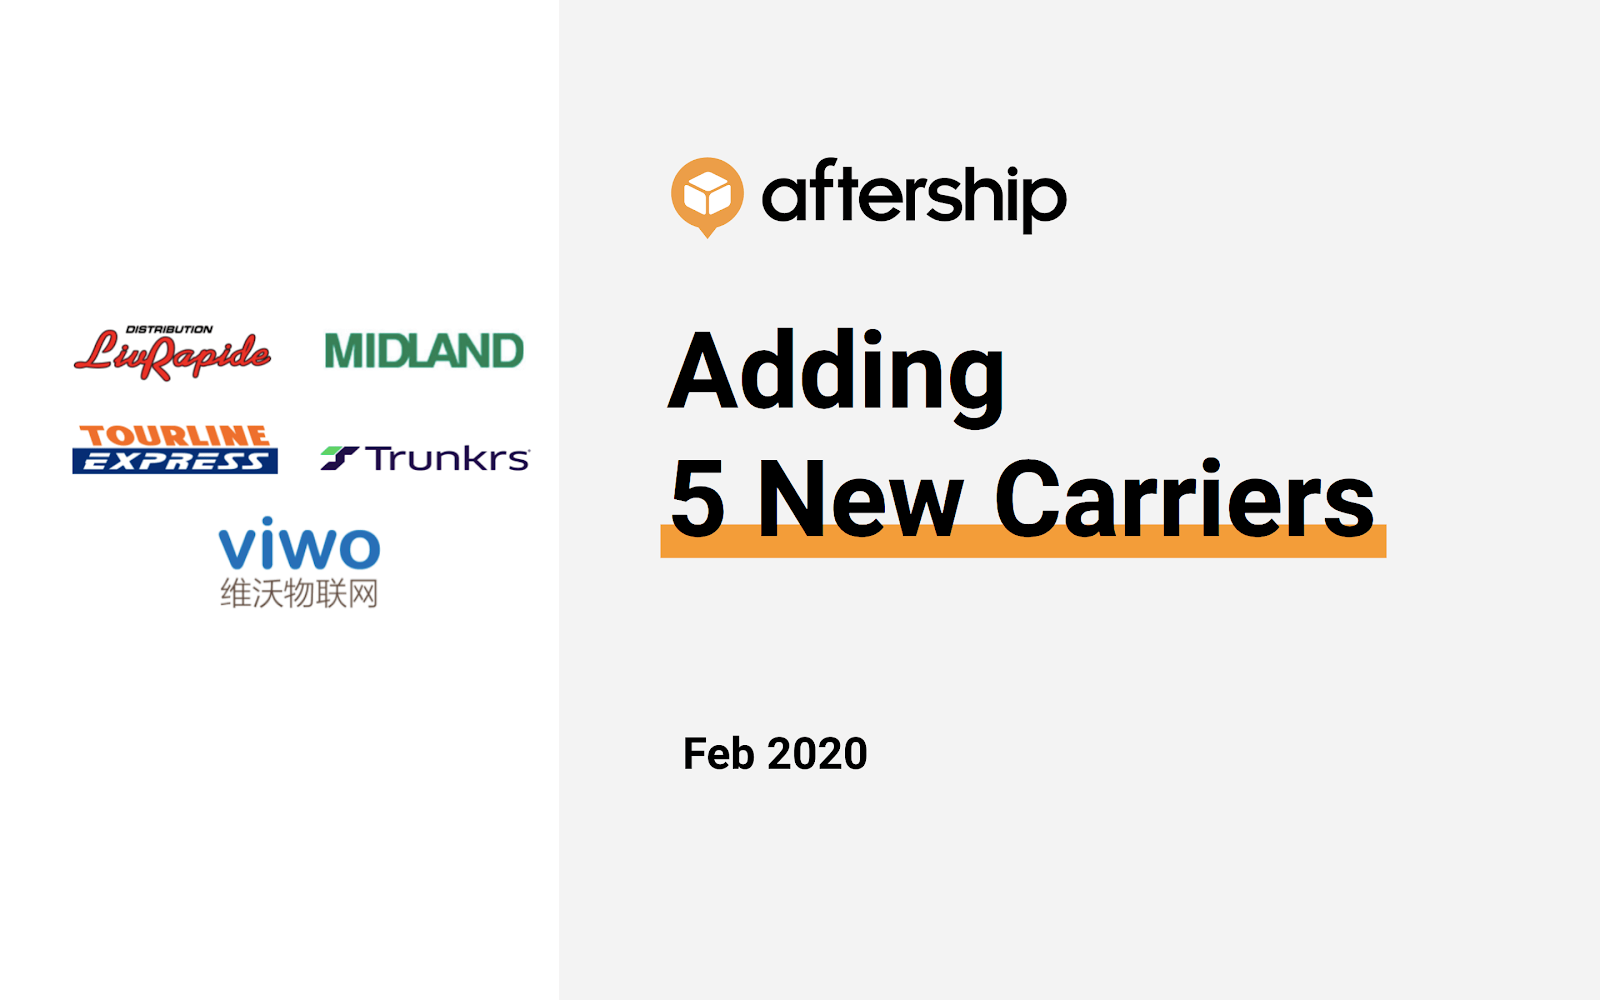 AfterShip newly supported 5 carriers